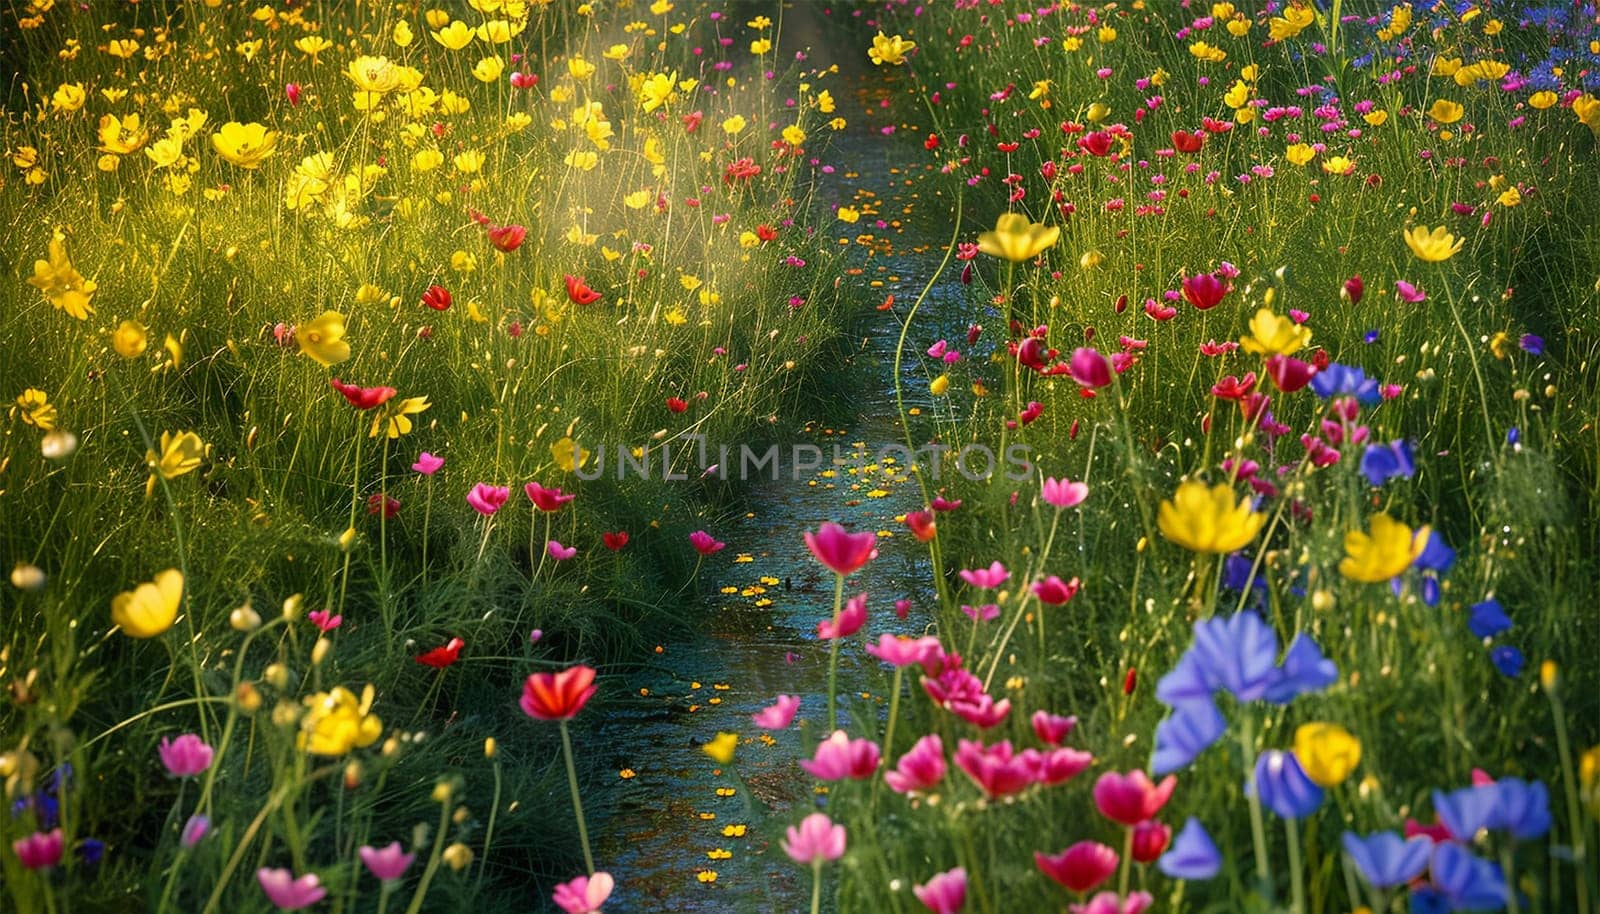 Field of cosmos flowers. A beautiful, sun-drenched spring summer meadow. Natural colorful panoramic landscape with many wild flowers of daisies against blue sky. A frame with soft selective focus. by Annebel146